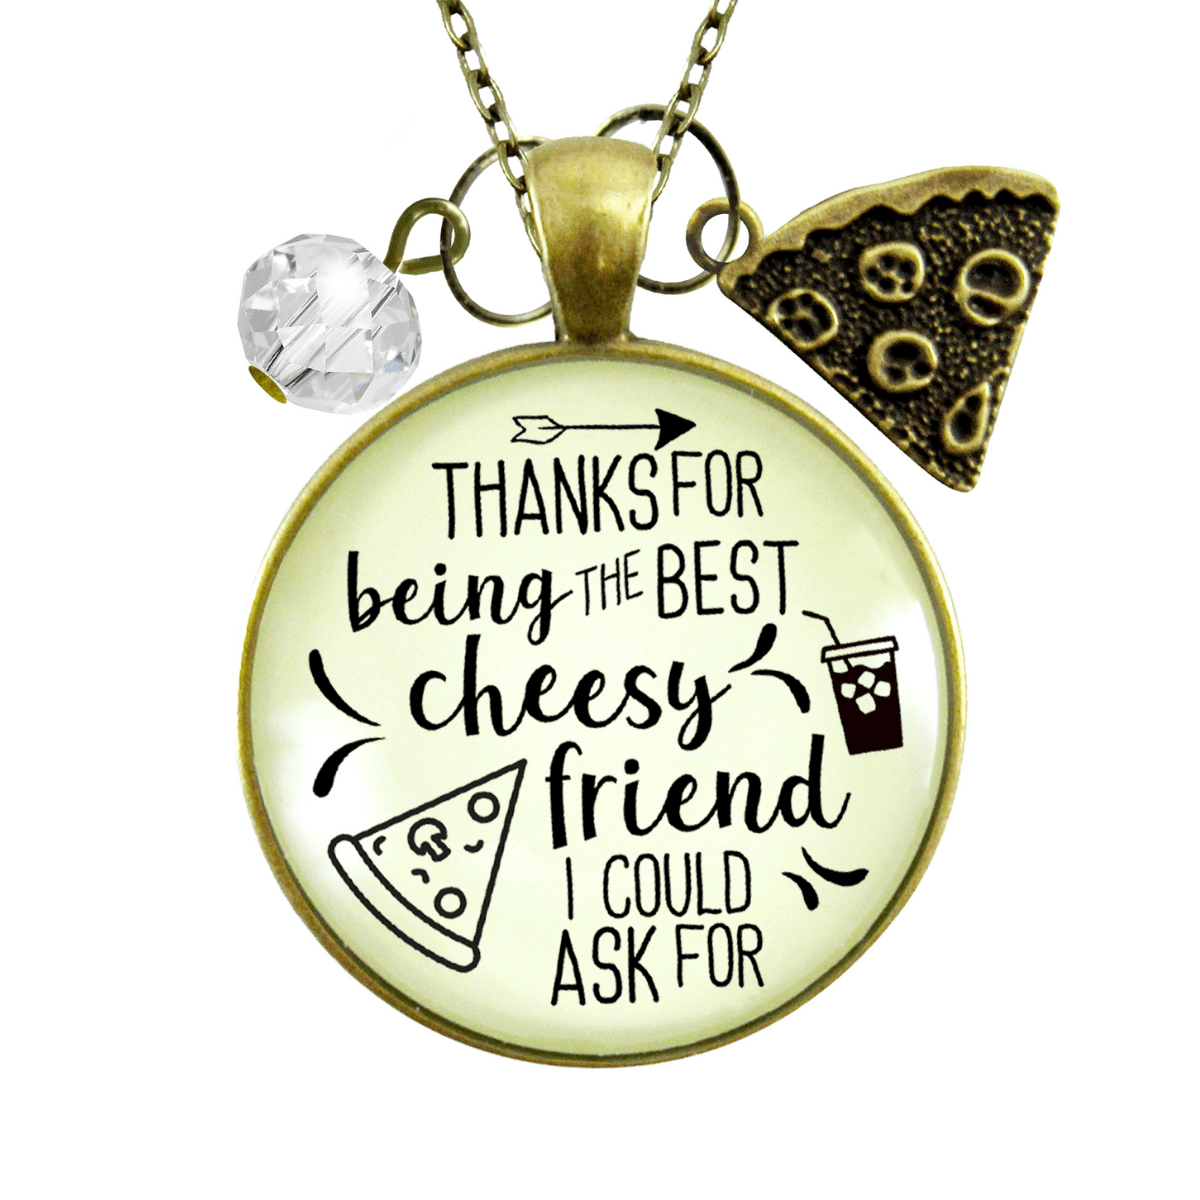 Gutsy Goodness Pizza BFF Necklace Thanks Being Best Cheesy Theme Jewelry - Gutsy Goodness;Pizza Bff Necklace Thanks Being Best Cheesy Theme Jewelry - Gutsy Goodness Handmade Jewelry Gifts